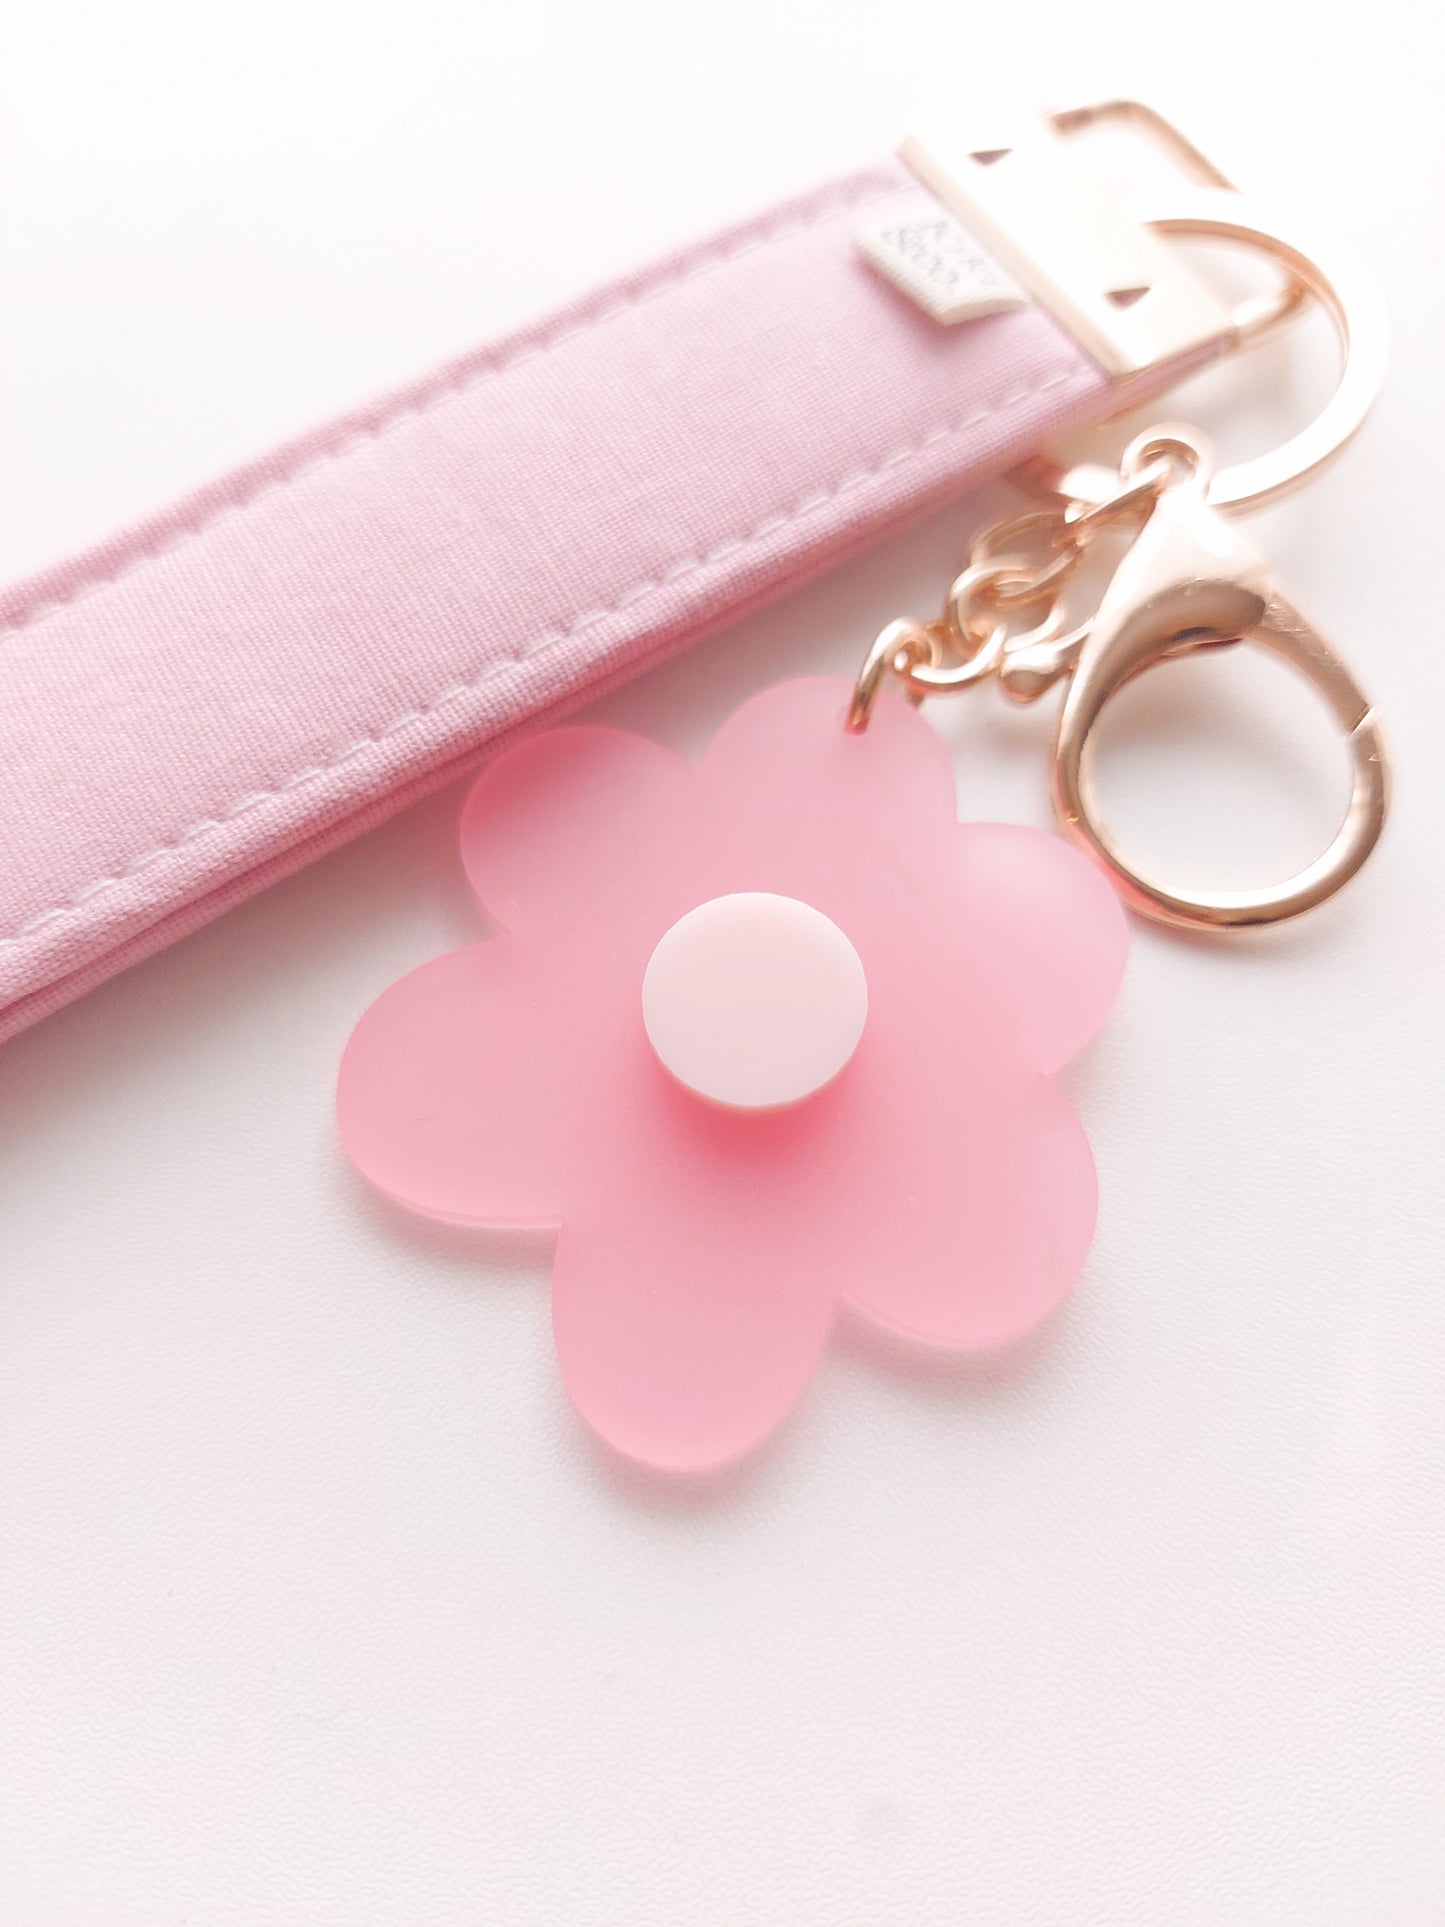 Daisy keyring - Frosted Pink of